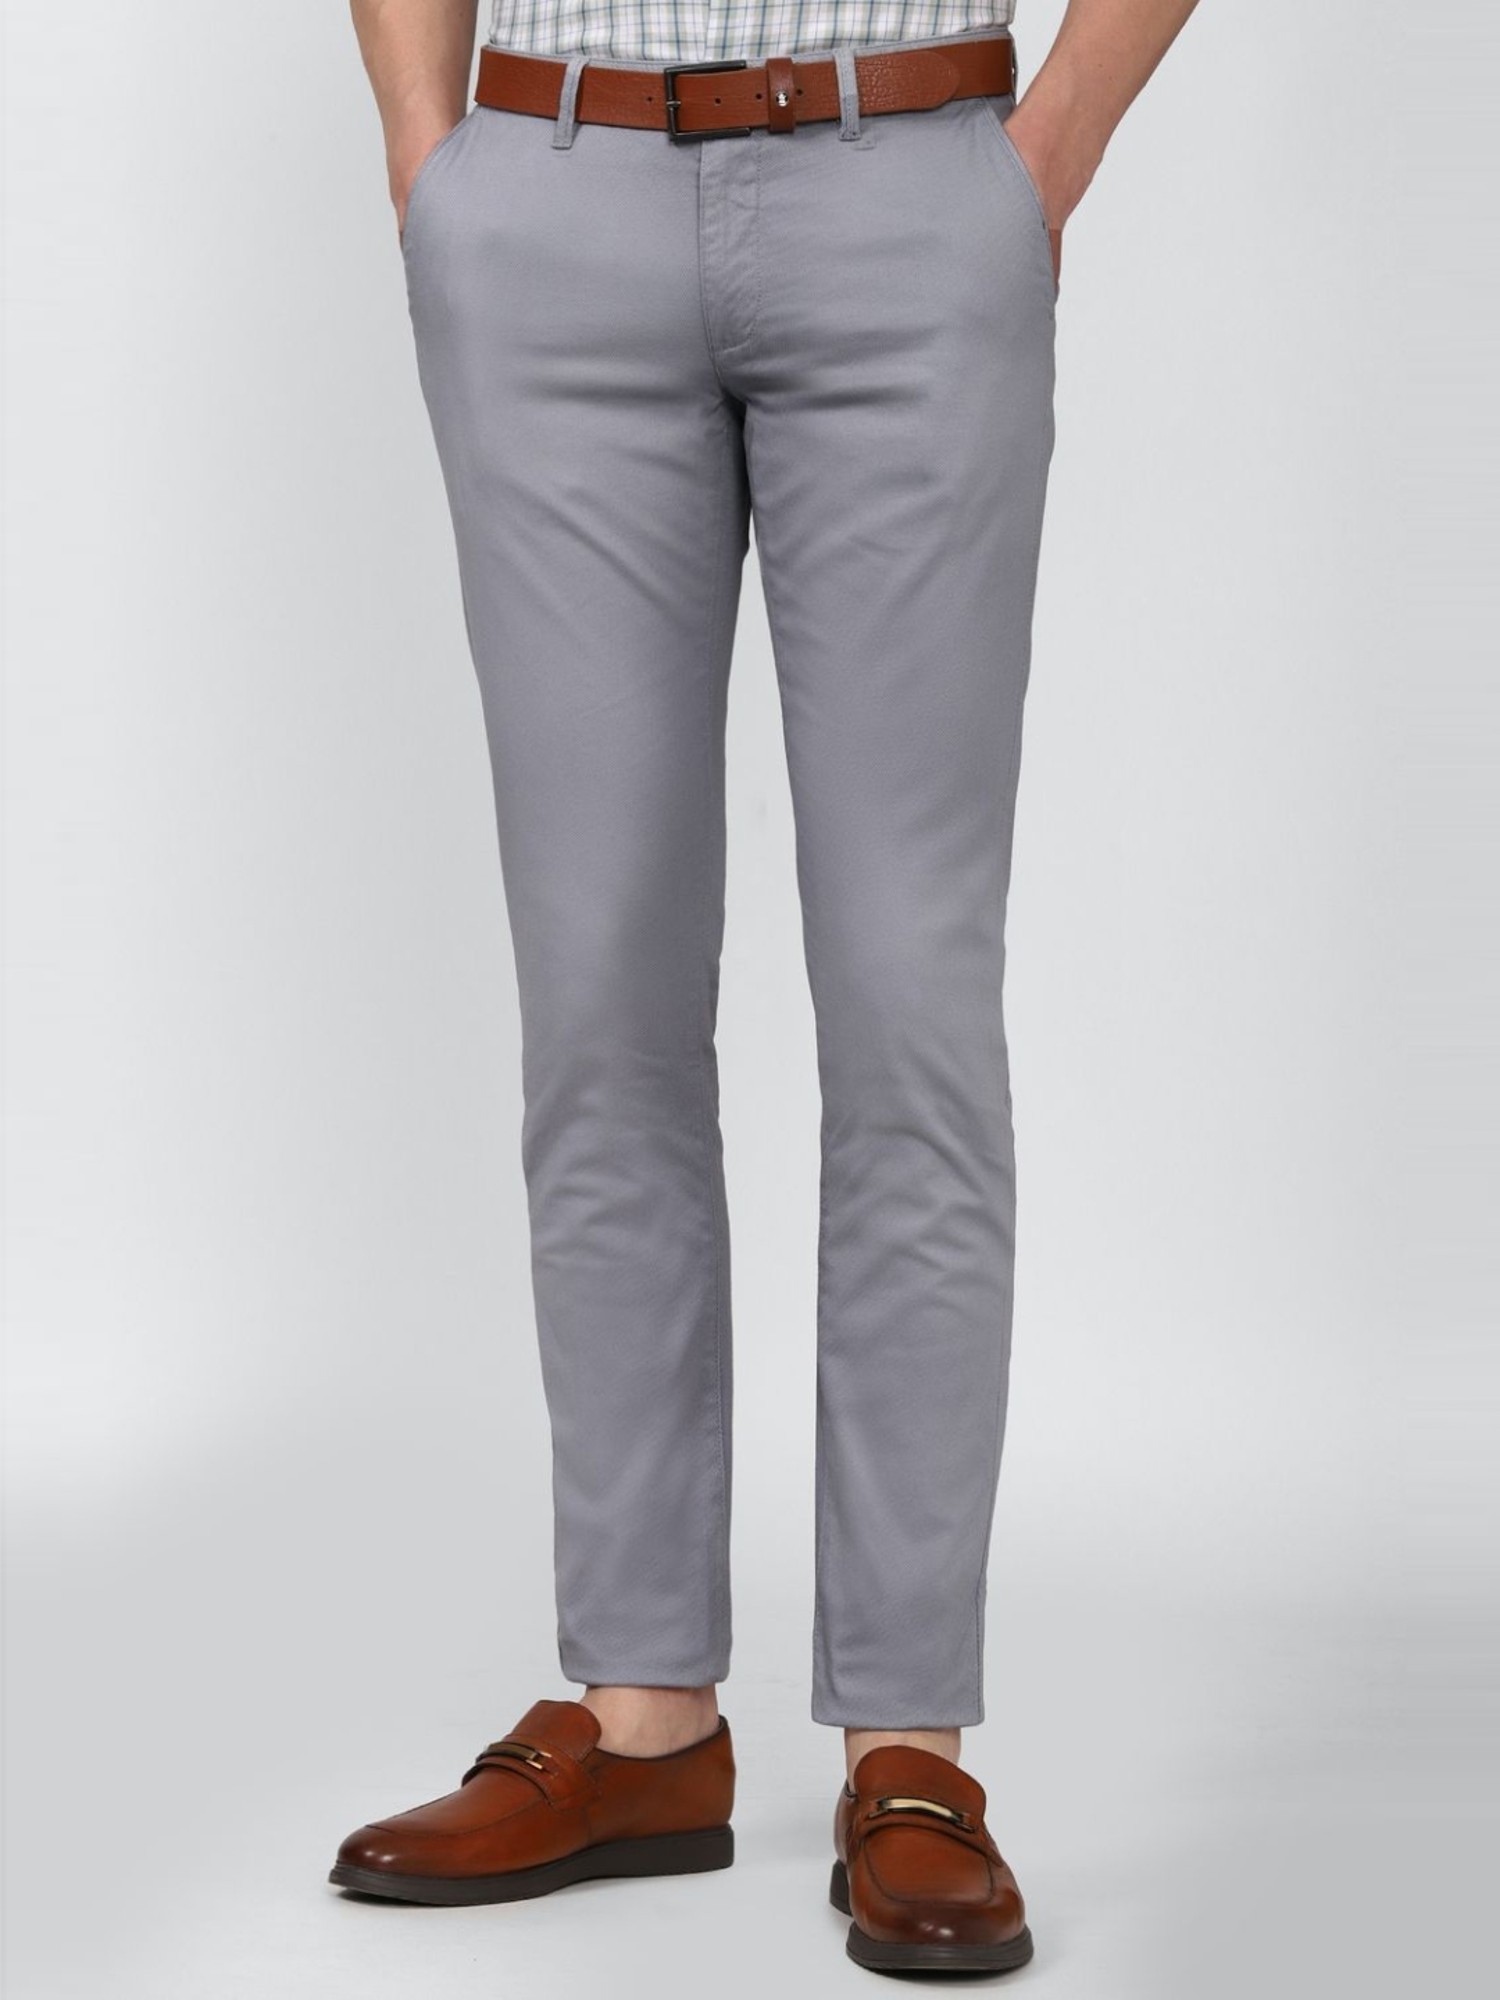 Steel Grey Formal and casual Pant online for men | Beyours